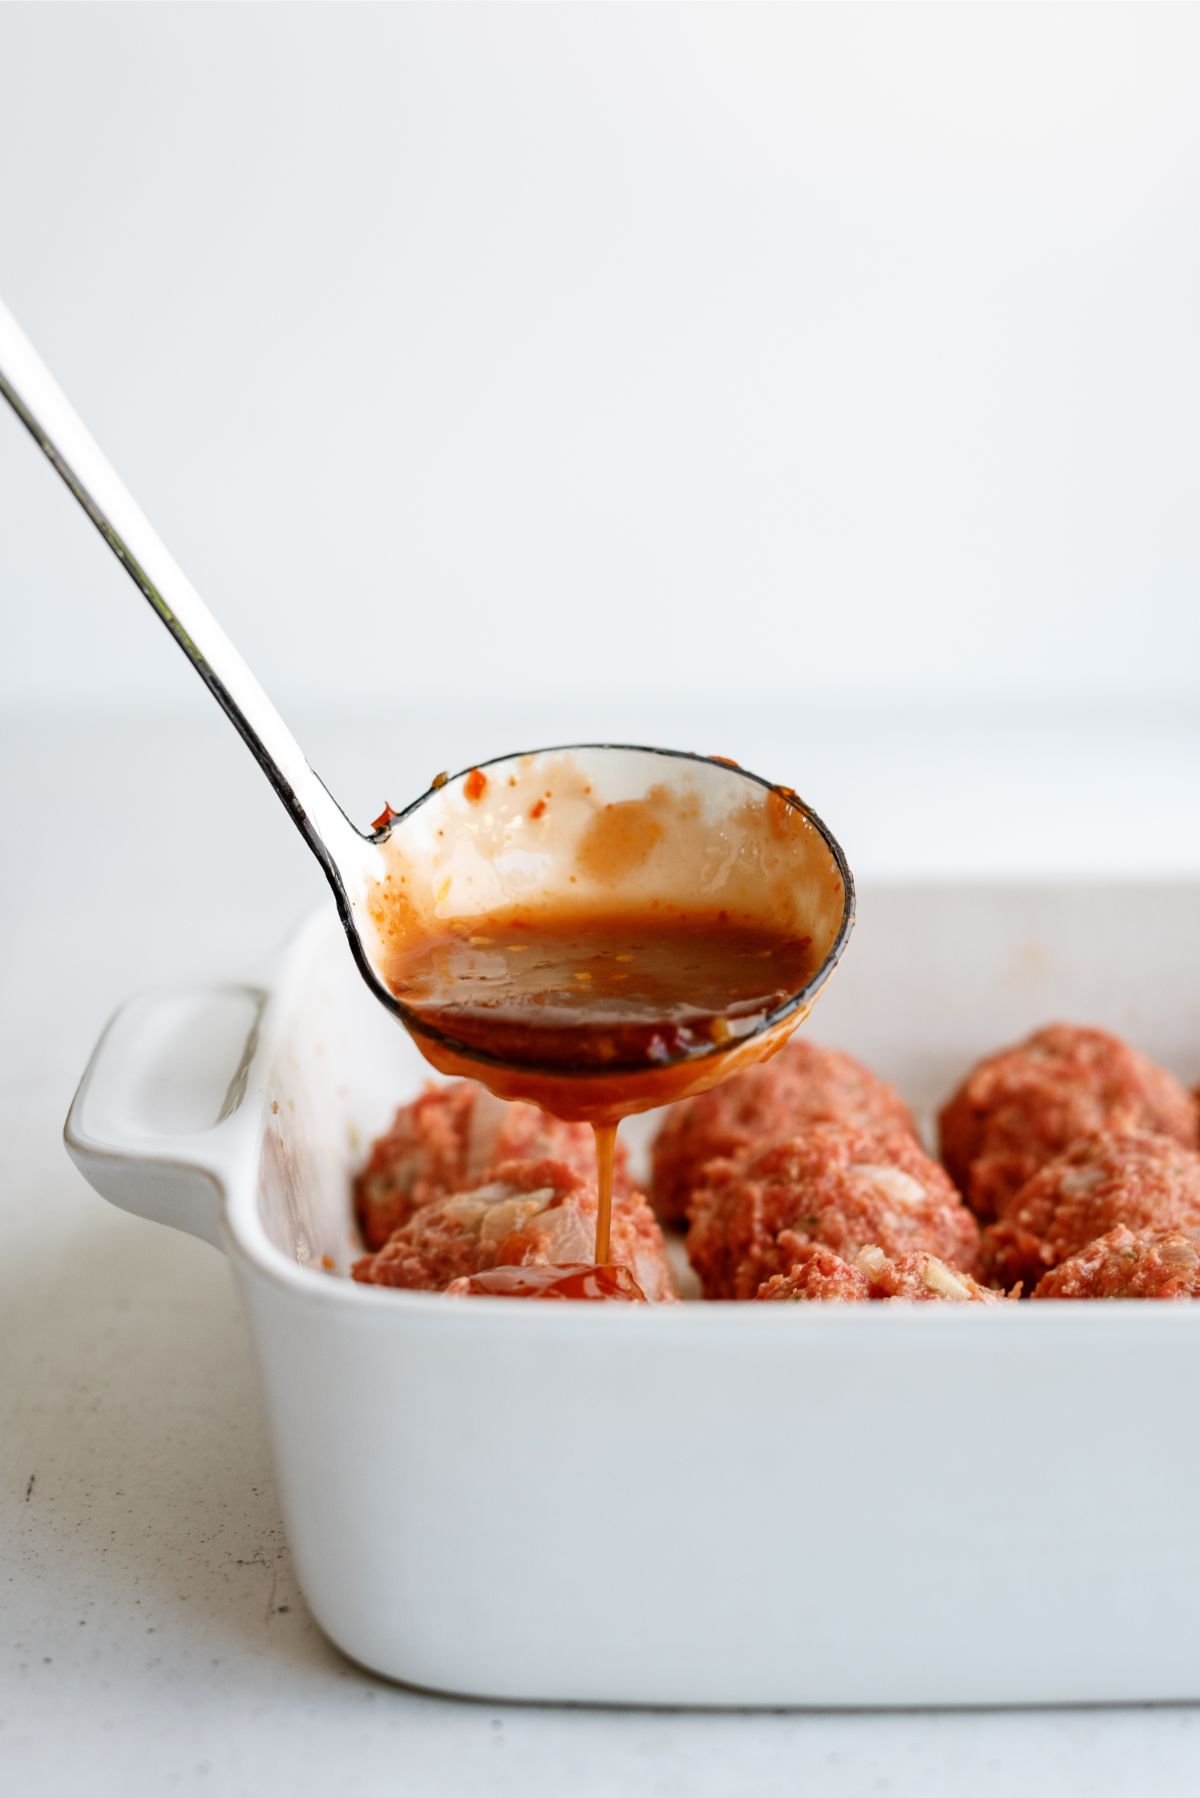 Spooning jelly sauce over meatballs in baking dish